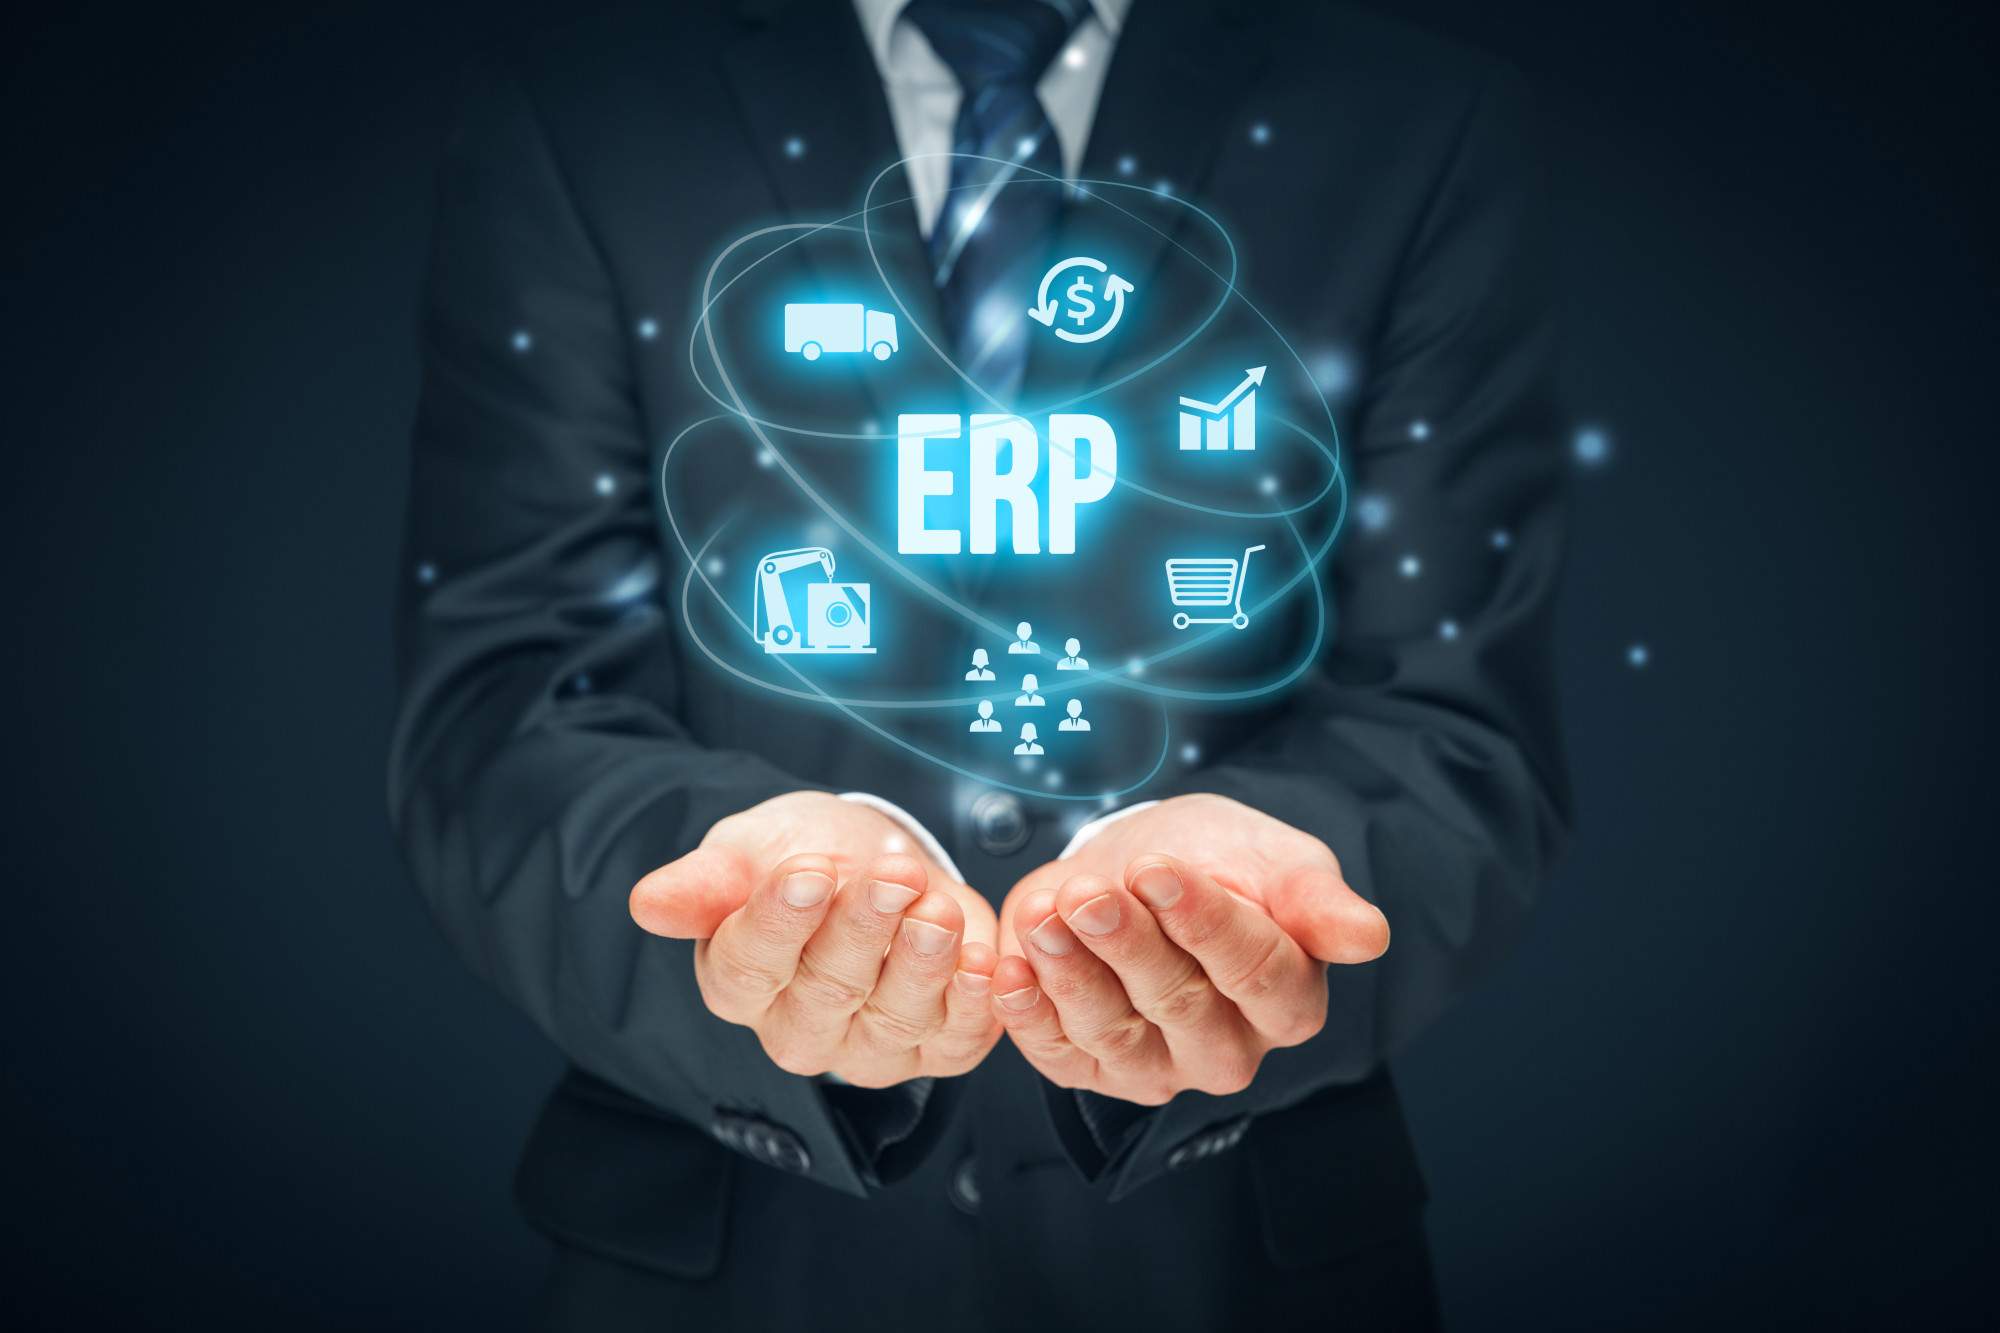 What Are the Benefits of ERP for Companies?